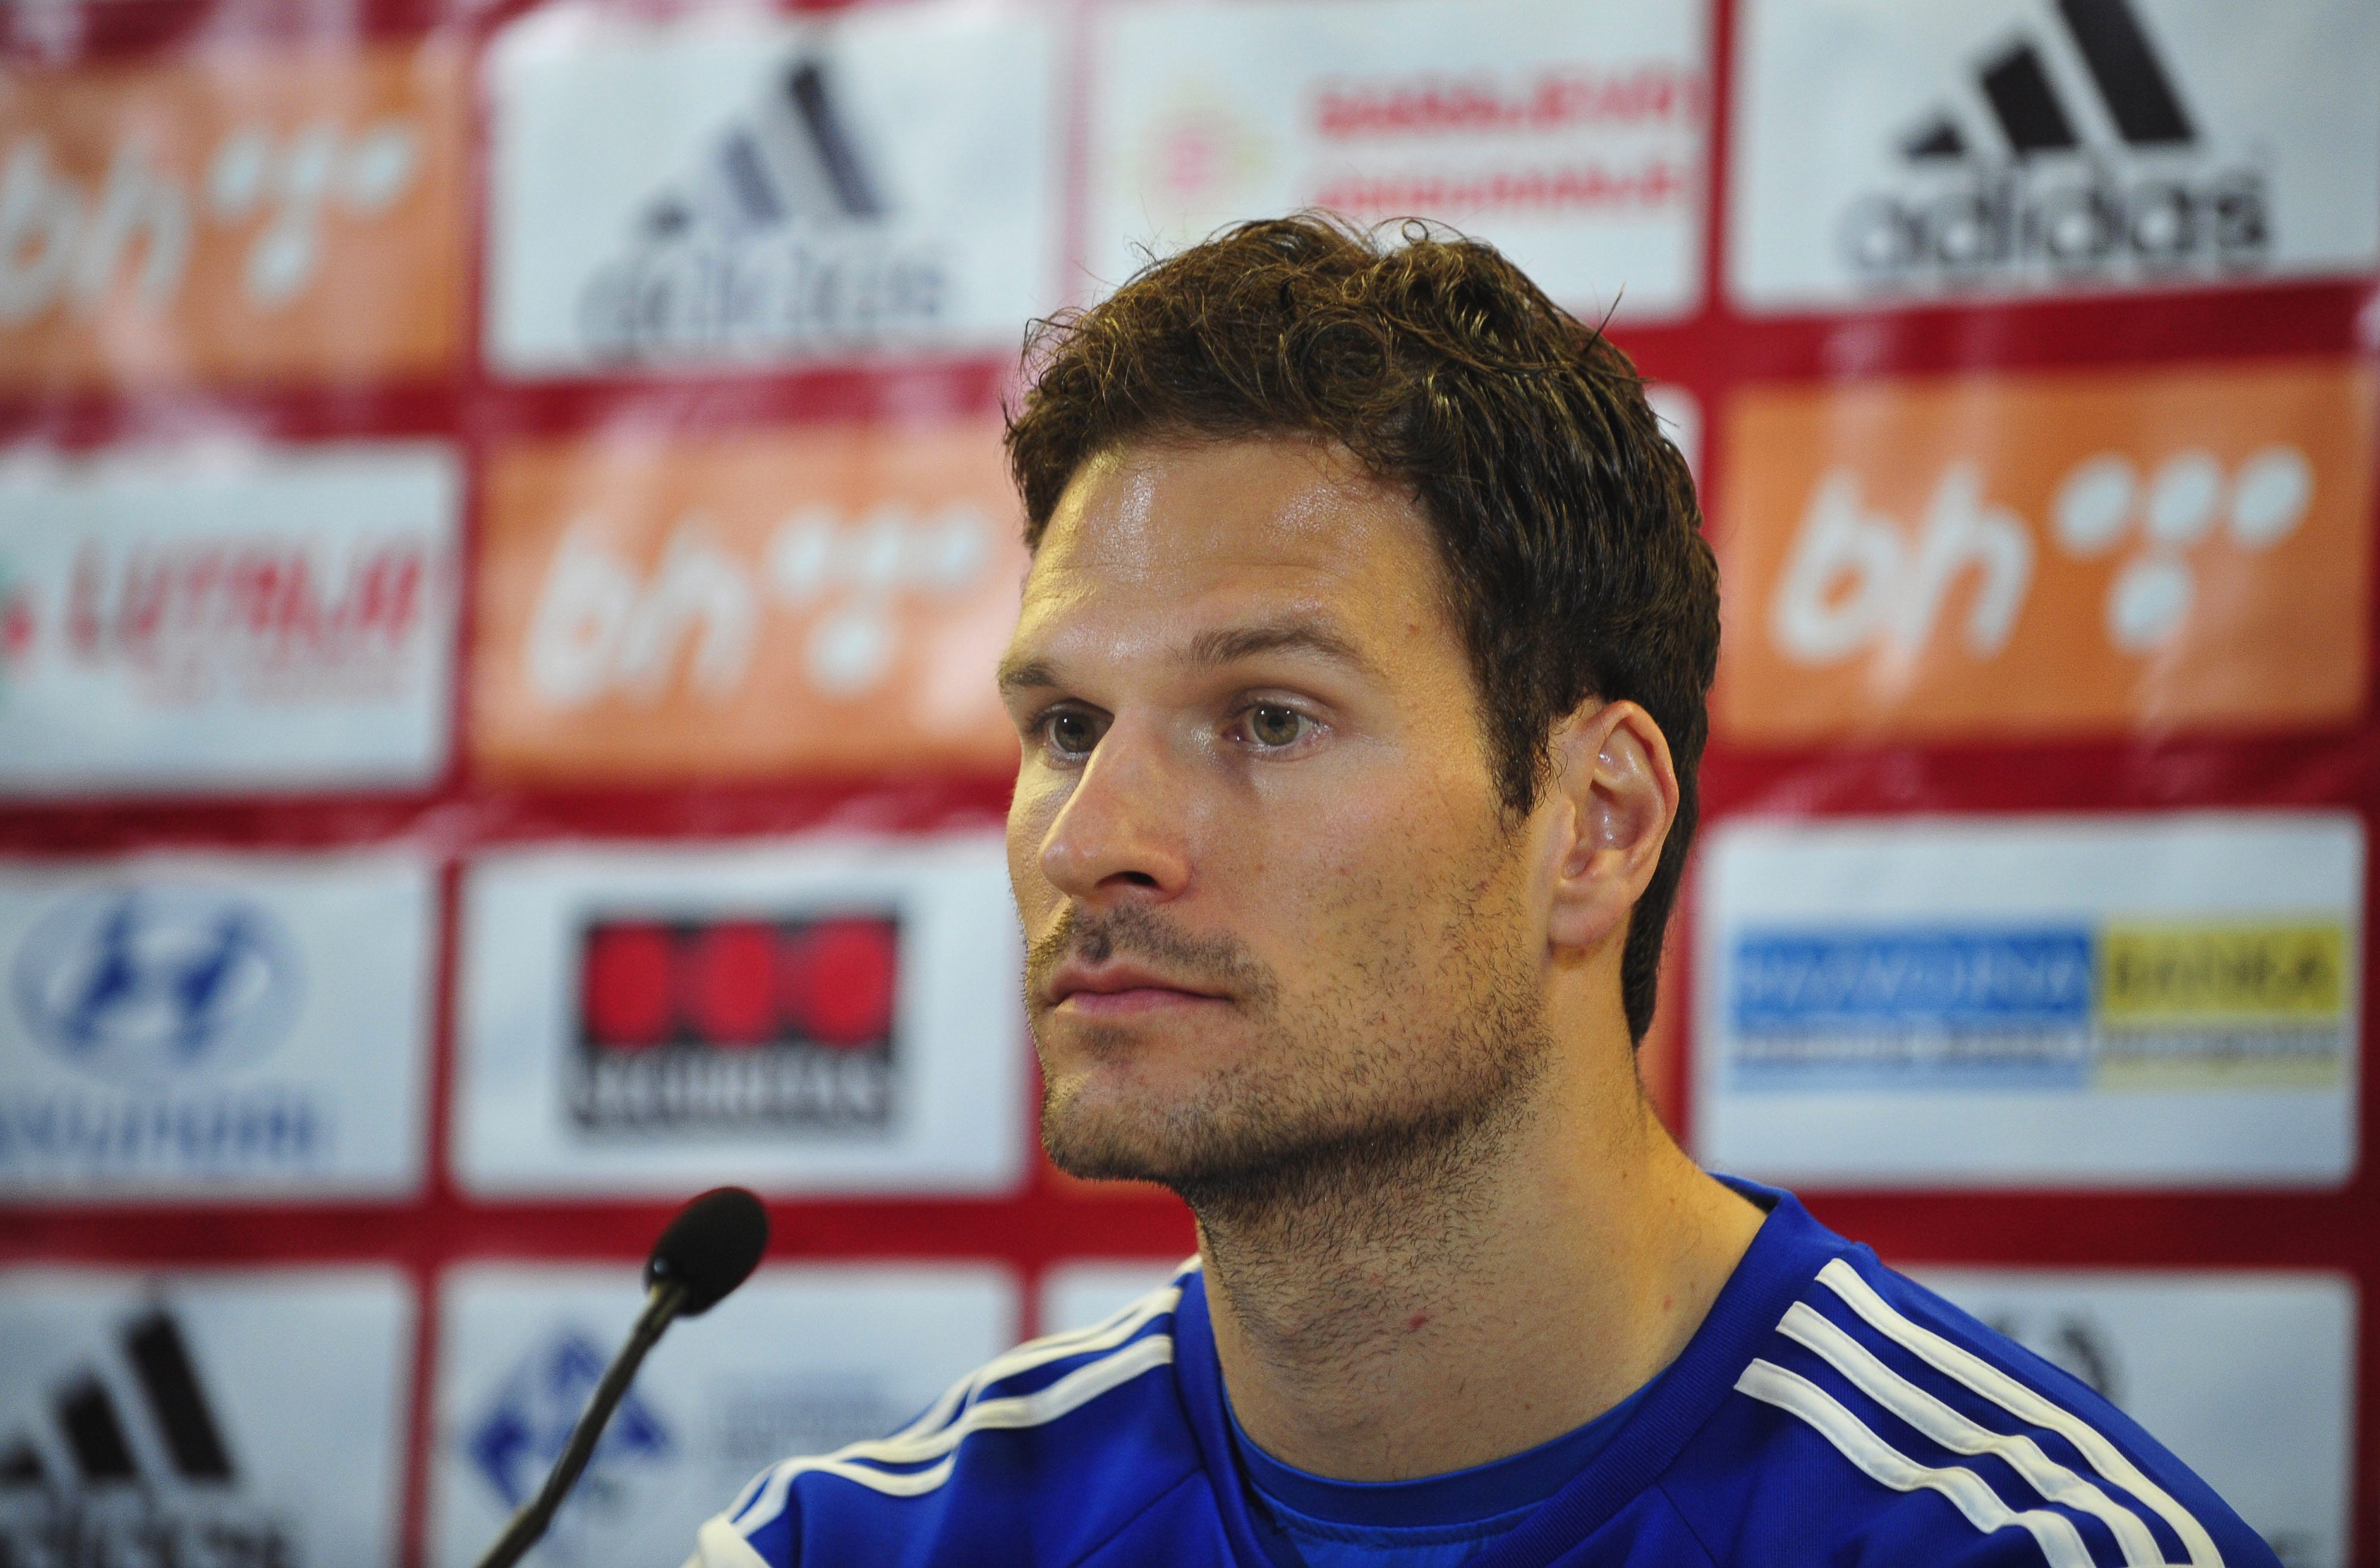 epa05027319 Bosnia and Herzegovina's goalkeeper Asmir Begovic attends a press conference in Dublin, Ireland, 15 November 2015. Bosnia and Herzegovina will face Ireland in the UEFA EURO 2016 qualification playoff second leg soccer match on 16 November 2015.  EPA/AIDAN CRAWLEY